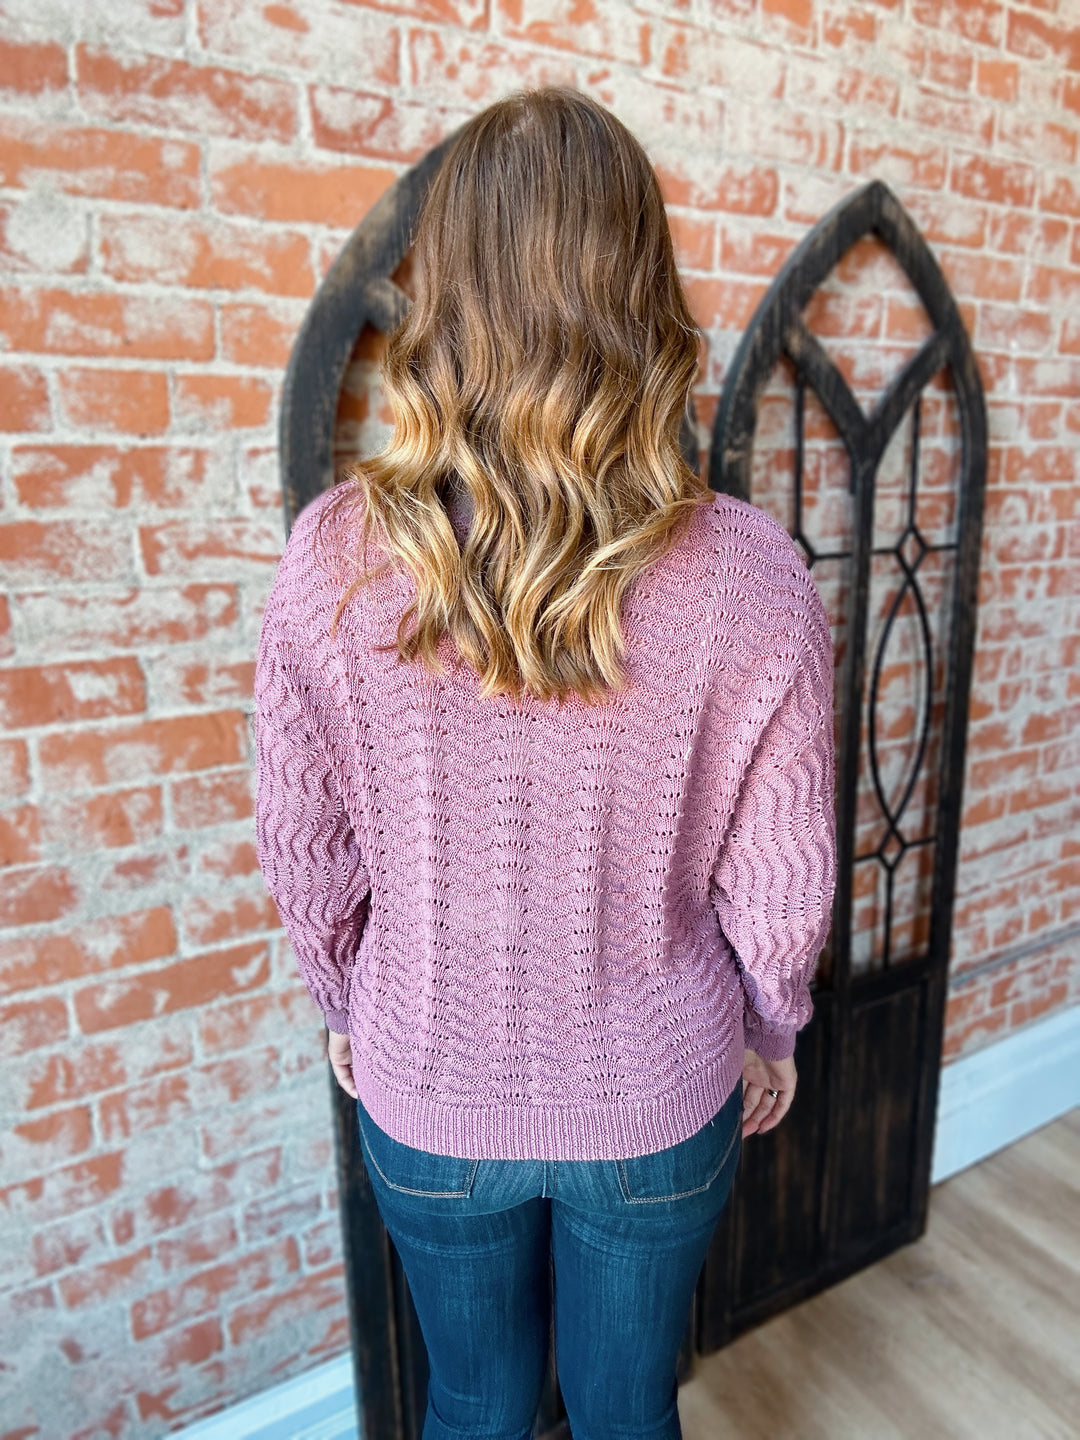 Leave It All Behind Dusty Plum Sweater